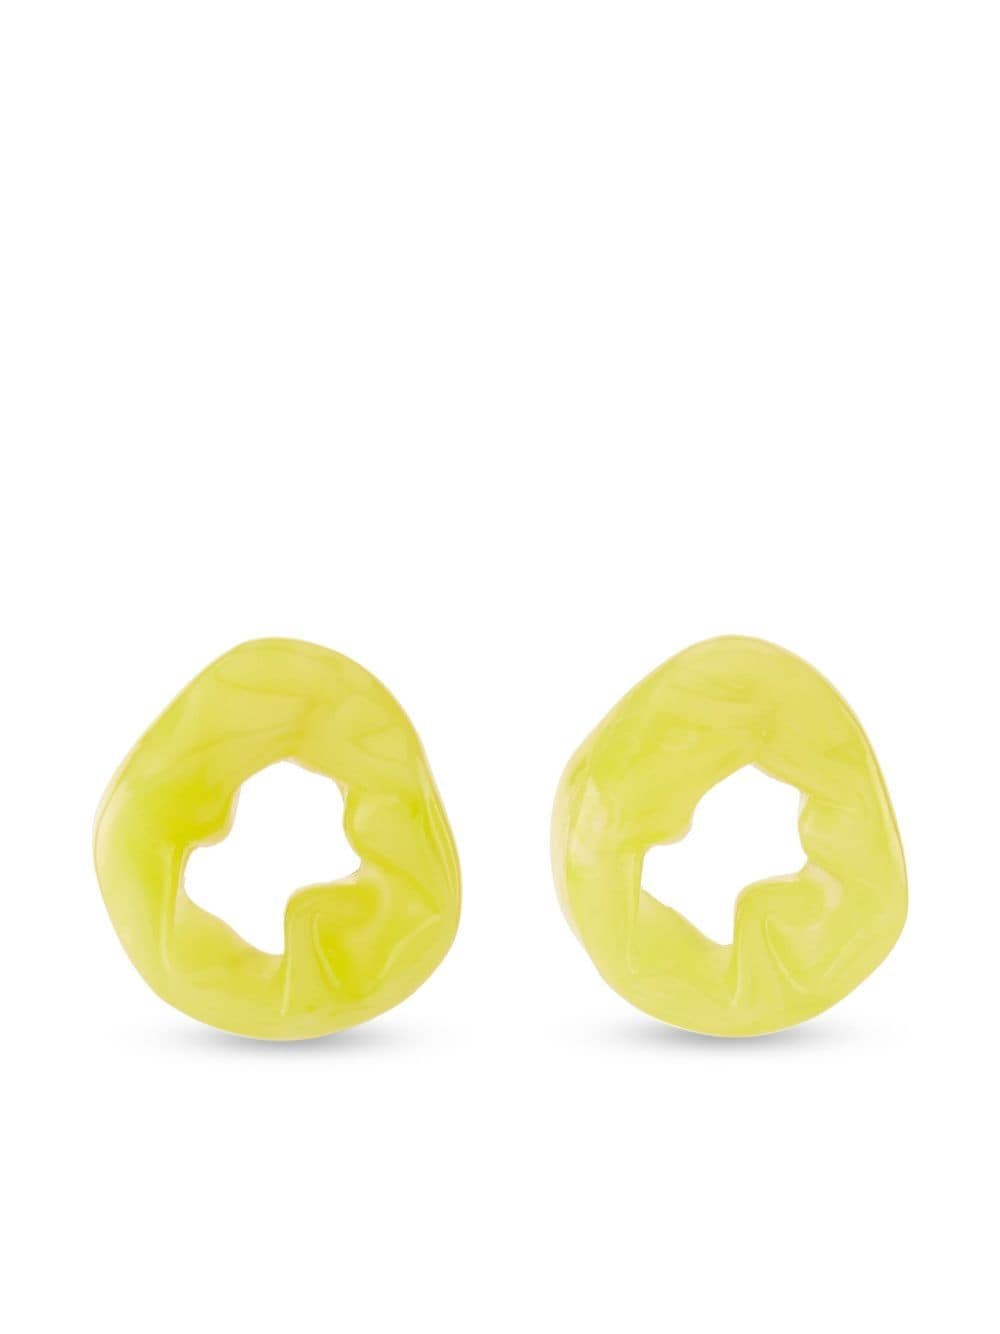 COMPLETEDWORKS-SCRUNCH PEARLESCENT STERLING SILVER EARRINGS BIORESIN-R2021 YELLOW